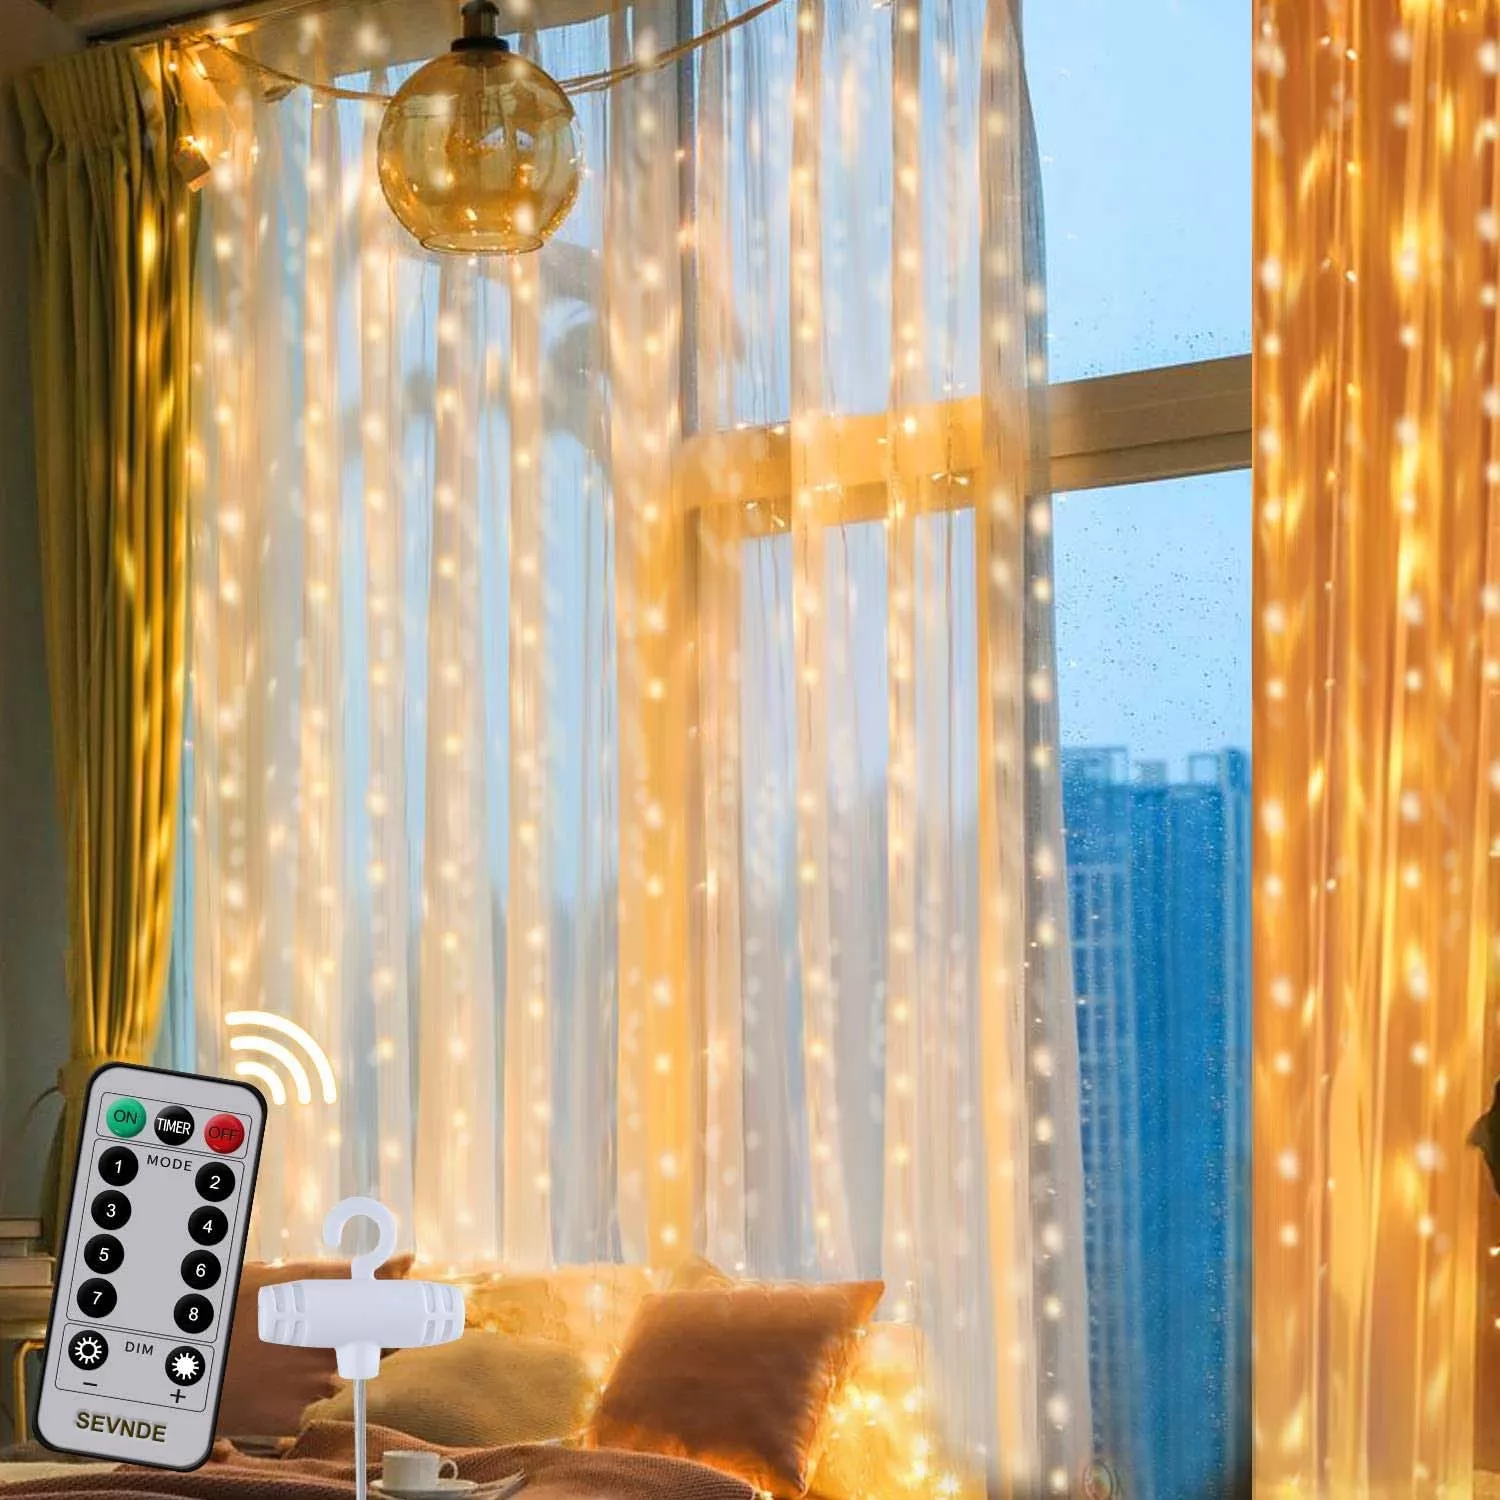 SEVNDE Curtain Lights, 8 Modes Hanging LED Curtain Lights for Bedroom,  USB Powered Waterproof  Fairy String Lights for Home Decorations